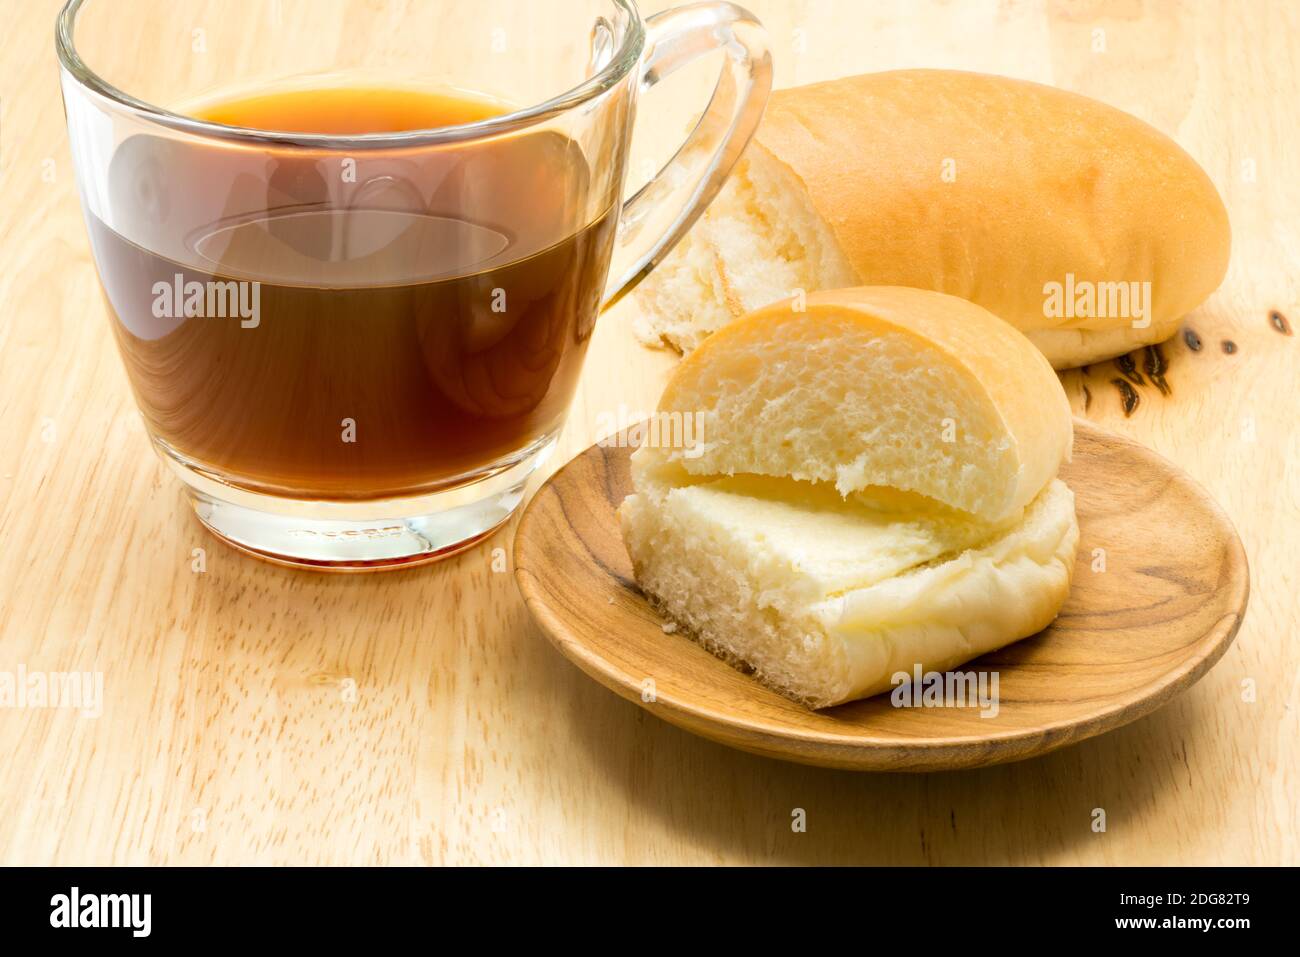 Hotdog bread filled with sweetened butter cream and a cup of coffee Stock Photo